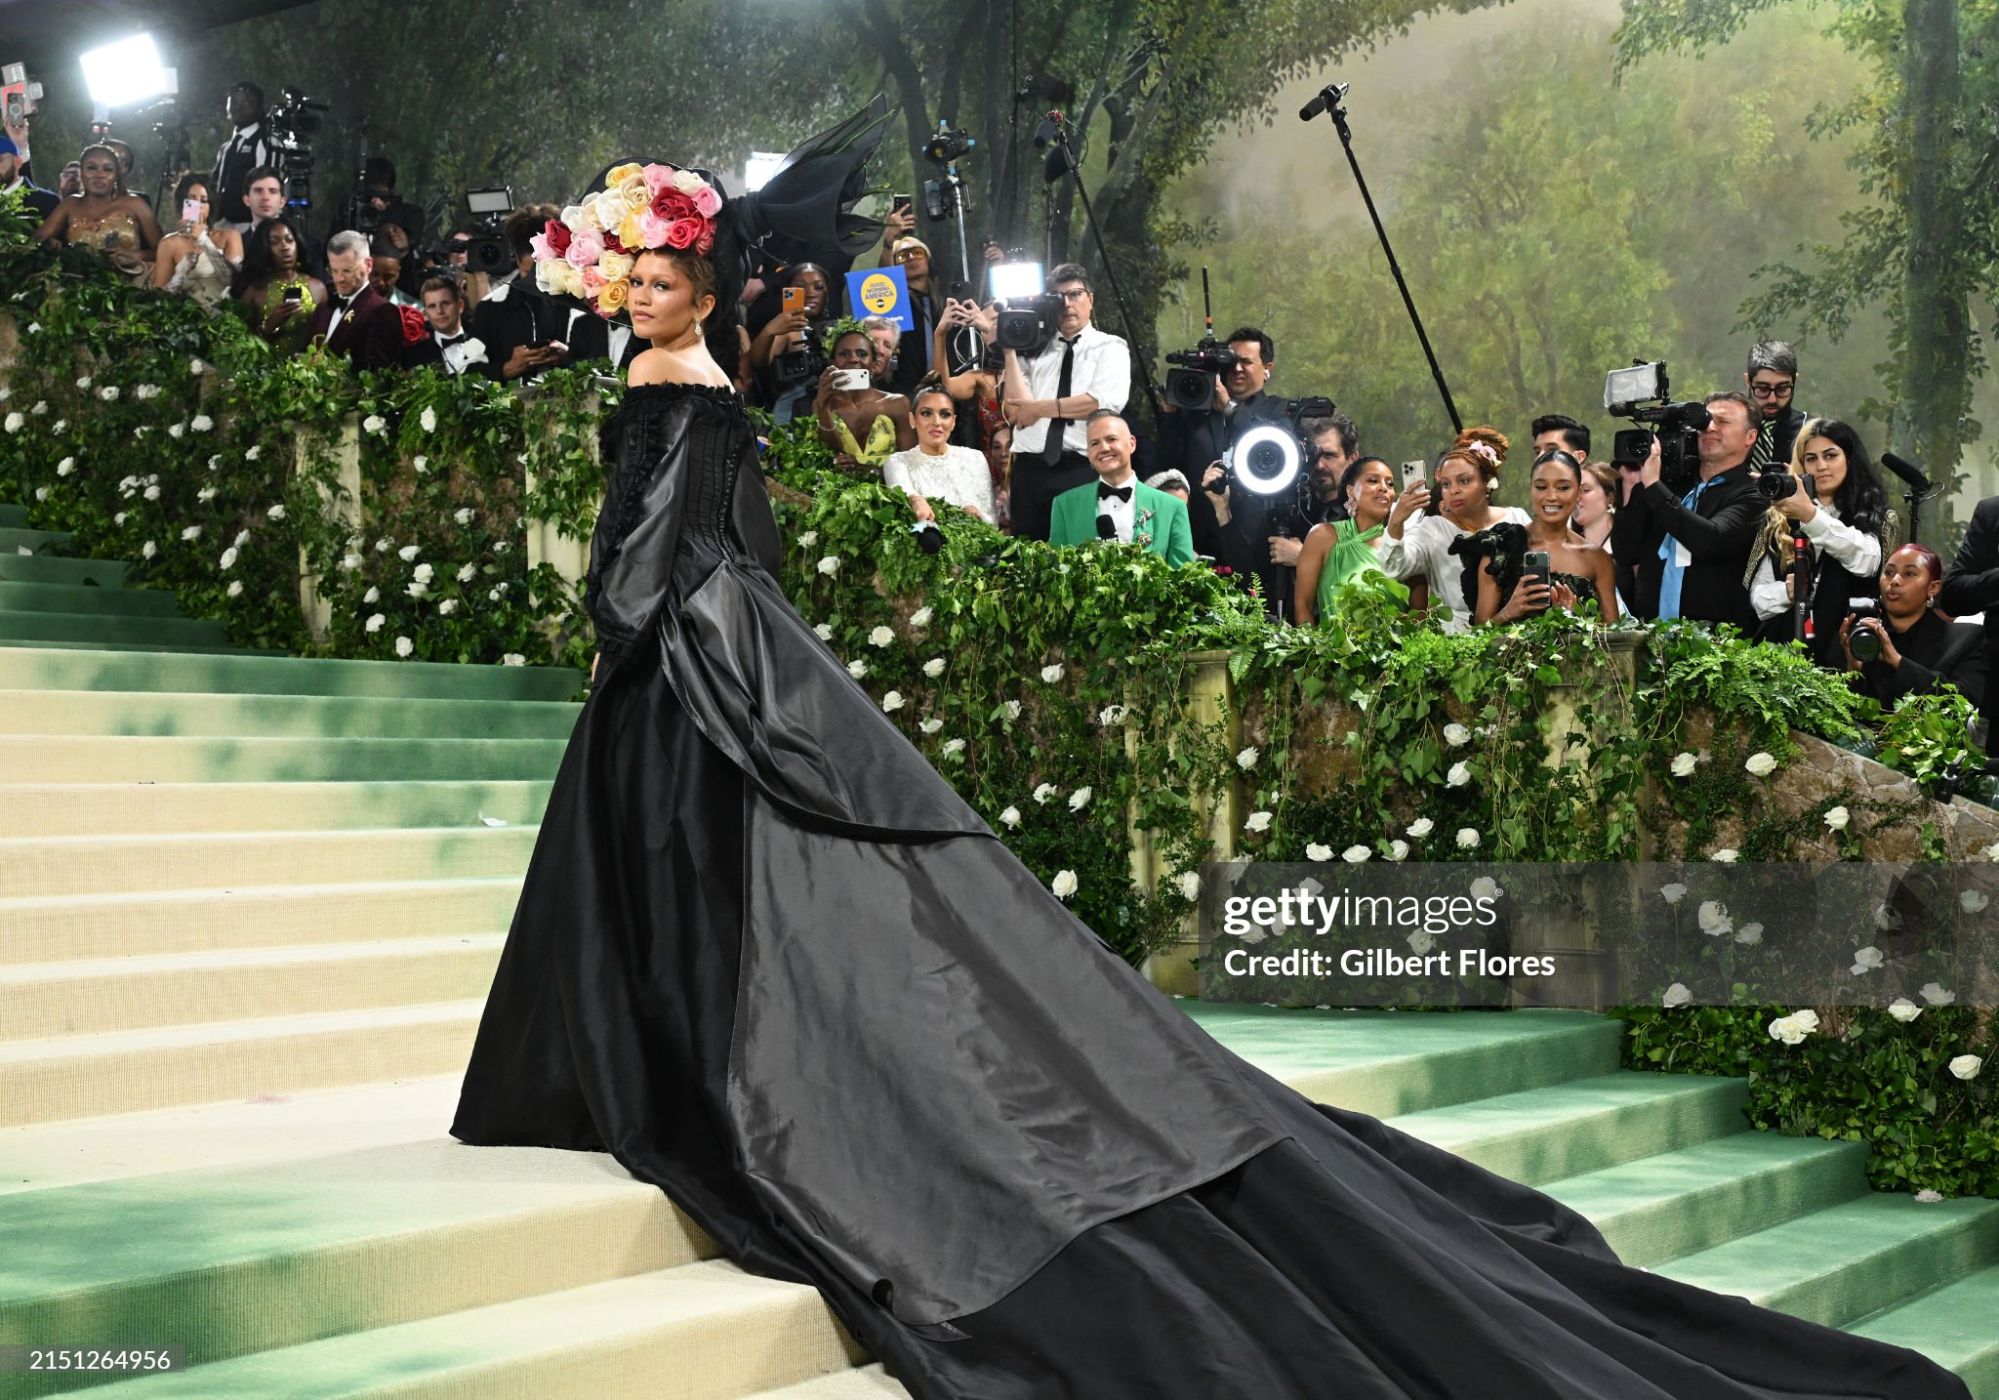 gettyimages-2151264956-2048x2048.jpg